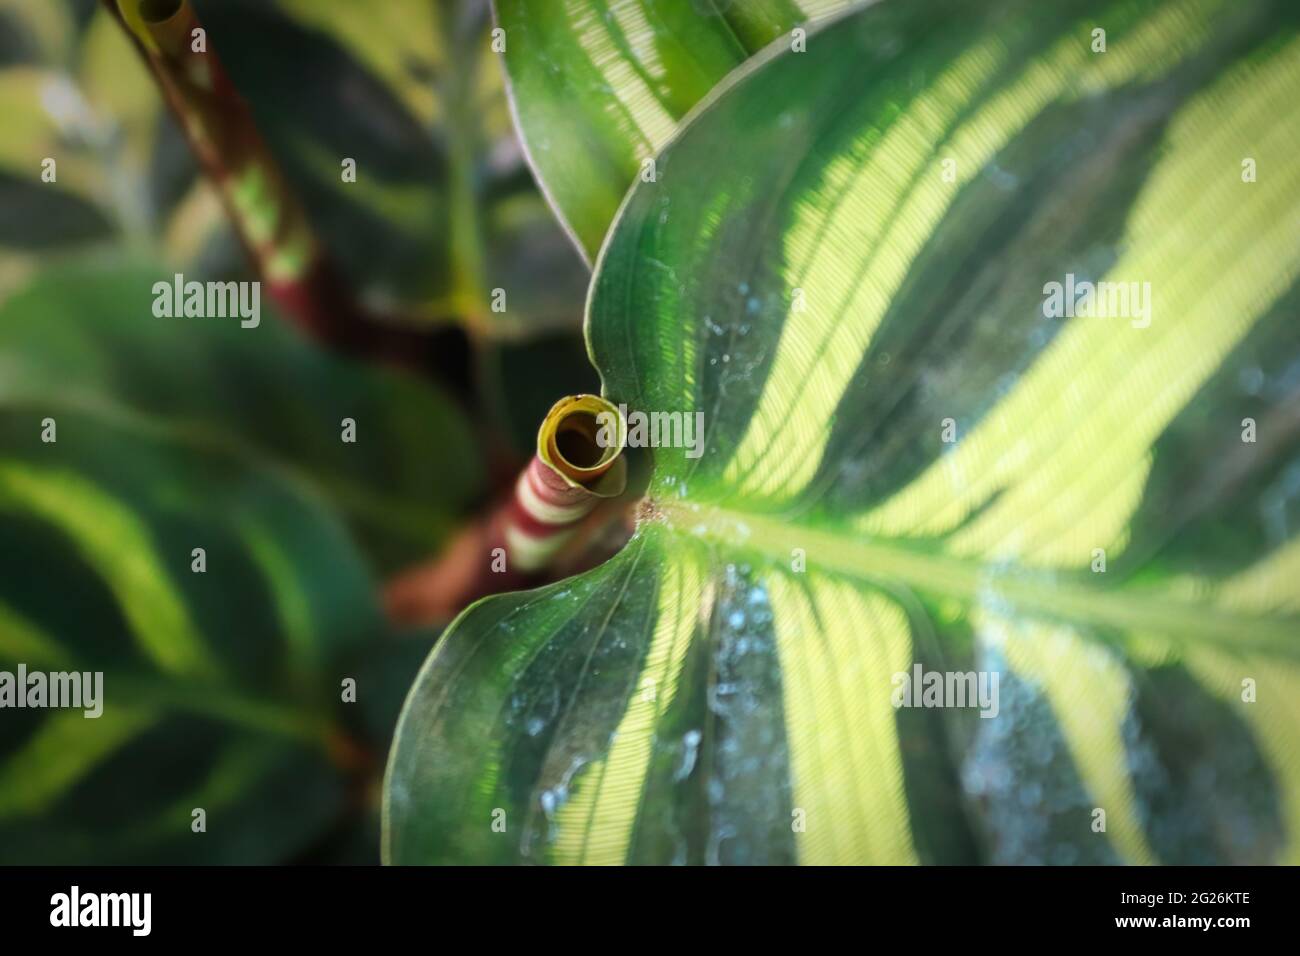 The curled up new leaf on a Calathea plant Stock Photo